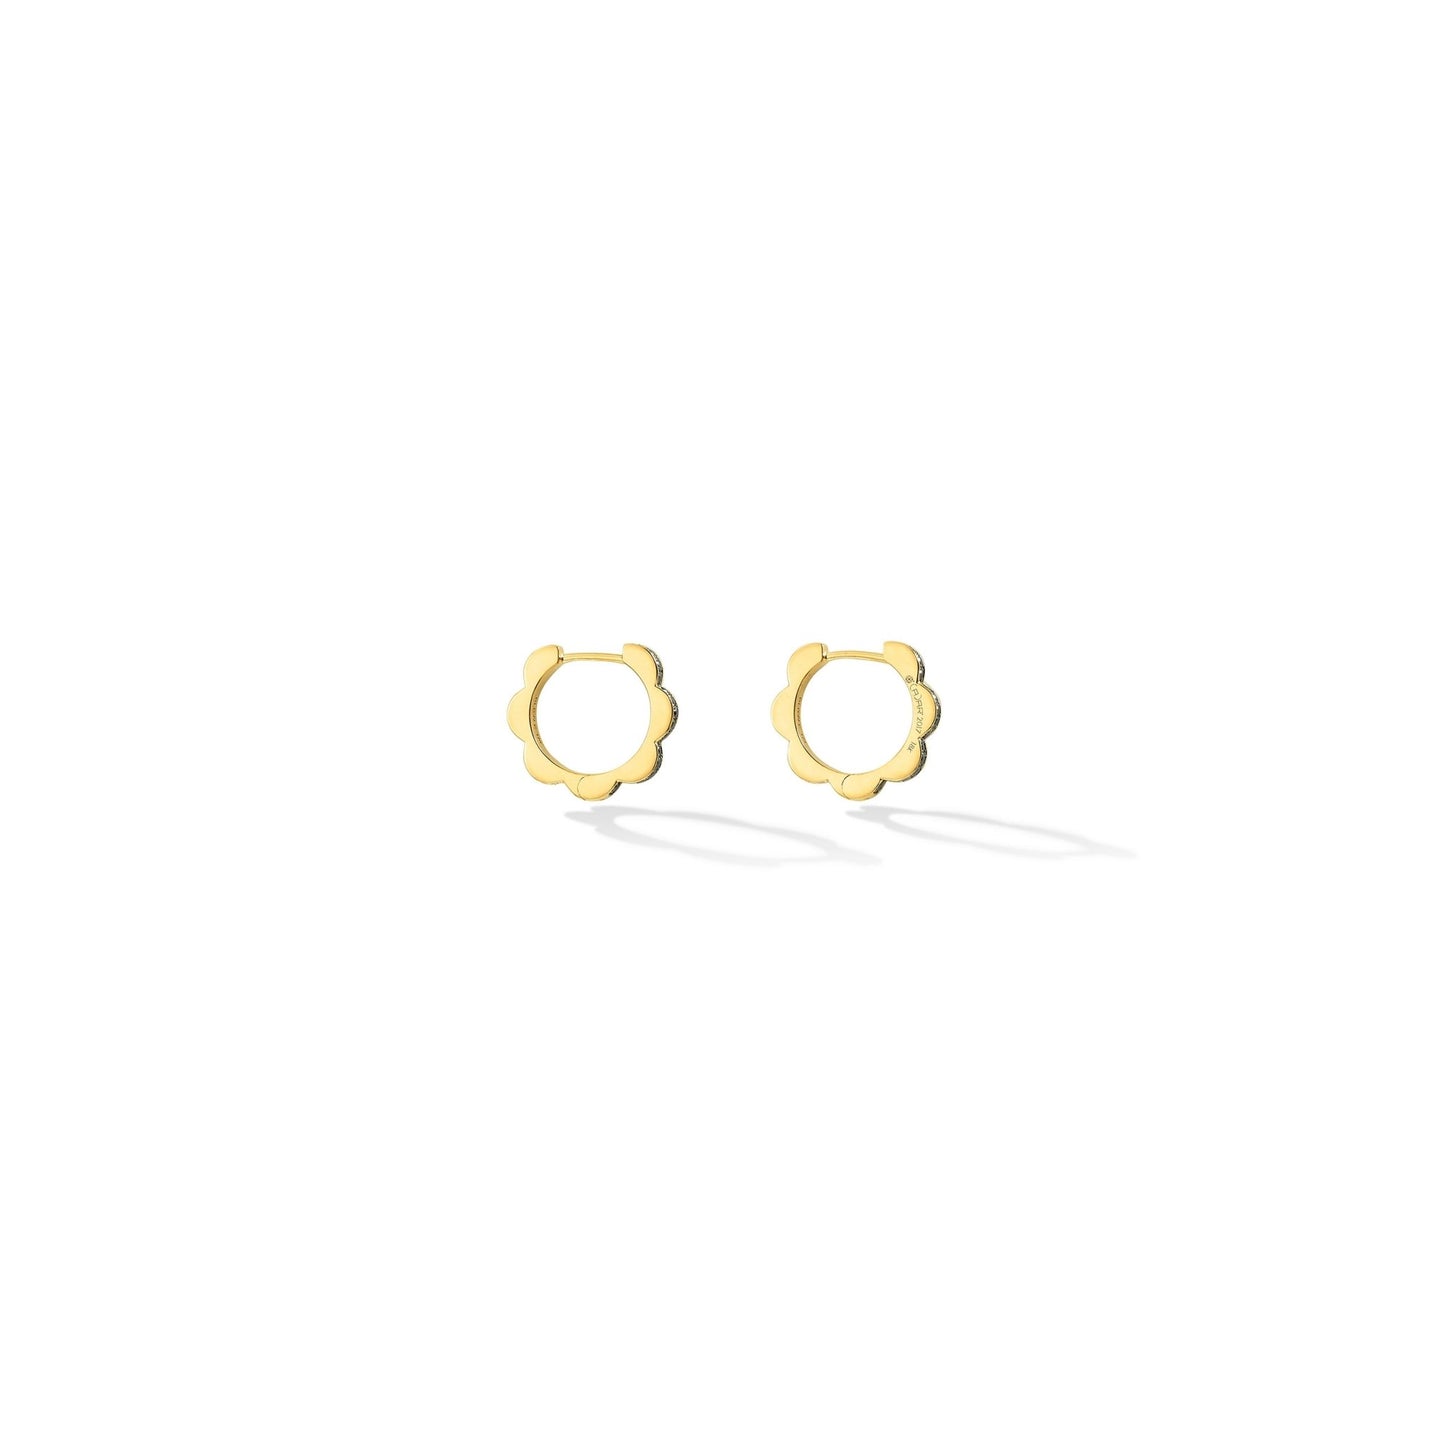 Small Yellow Gold Triplet Hoop Earrings with Black and White Diamonds - Cadar